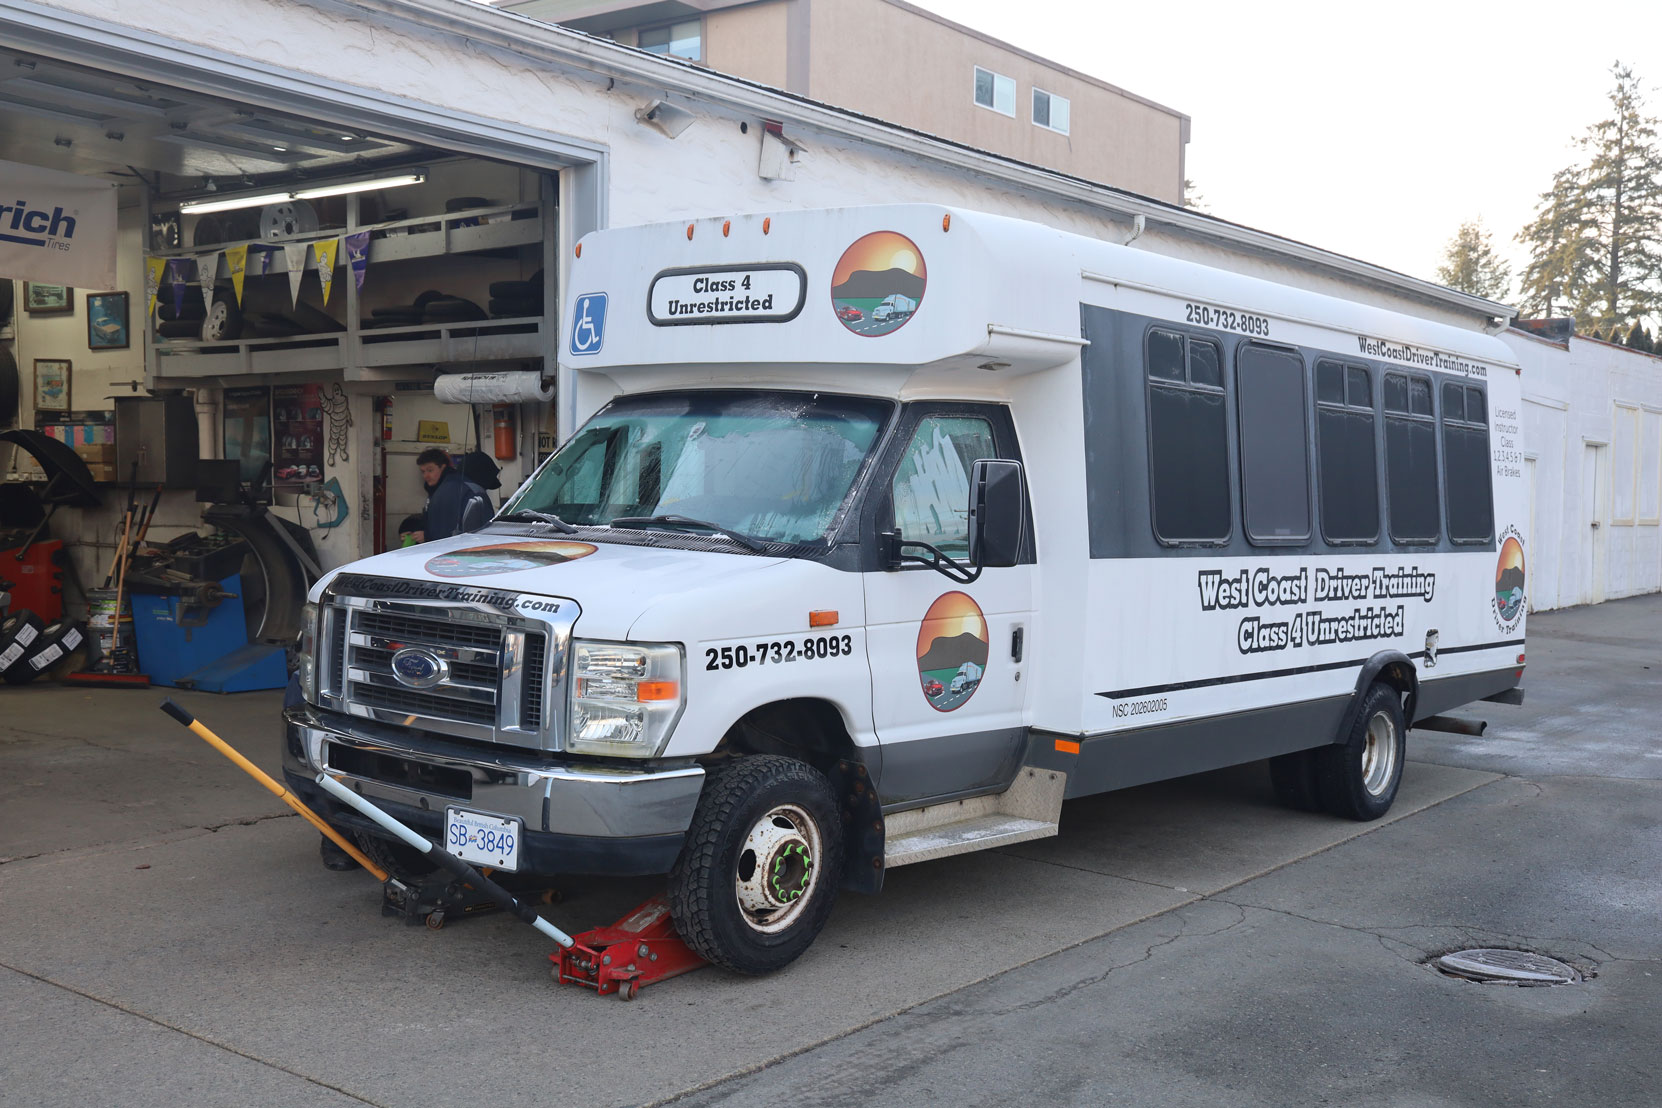 Preparation for installing new B.F. Goodrich tires on the steering axle of our Ford E450 bus at Joe's Tire Hospital, February 2023 [photo: West Coast Driver Training]